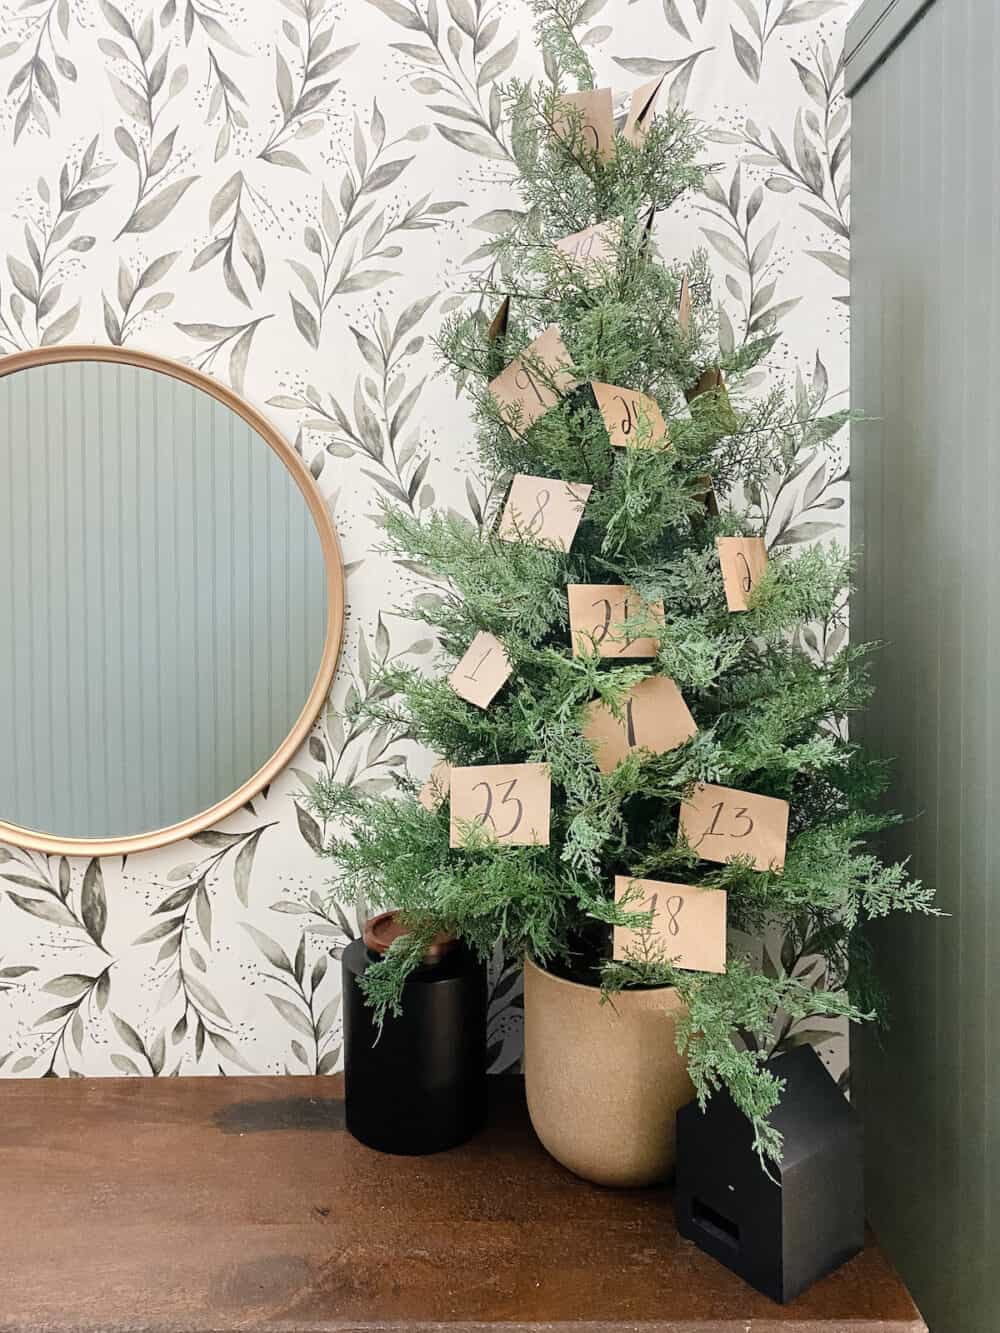 tabletop Christmas tree with numbered envelopes on it